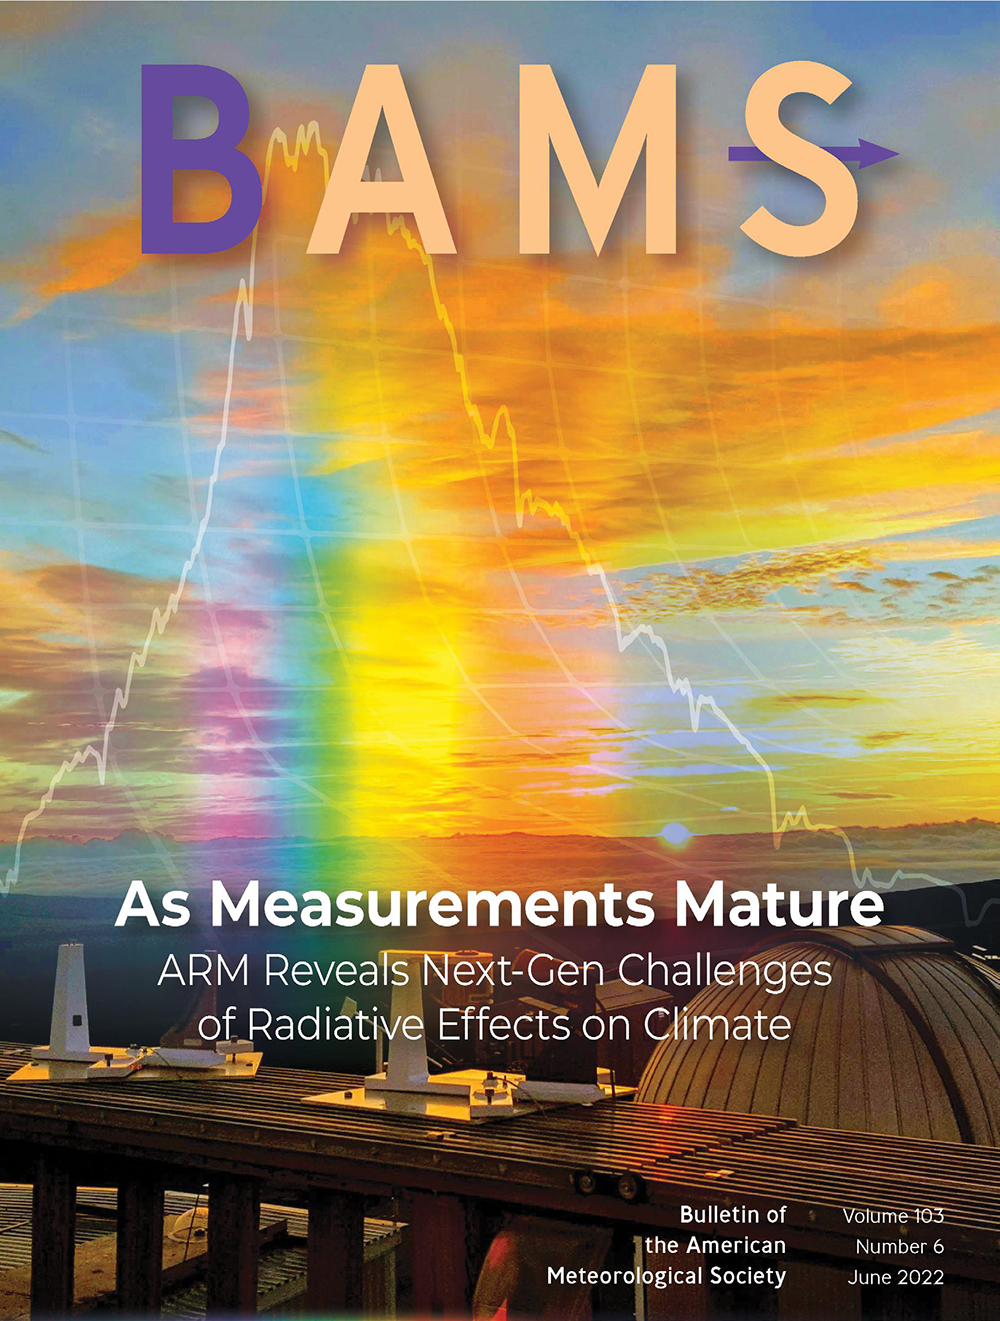 The June 2022 BAMS cover says, "As Measurements Mature: ARM Reveals Next-Gen Challenges of Radiative Effects on Climate."